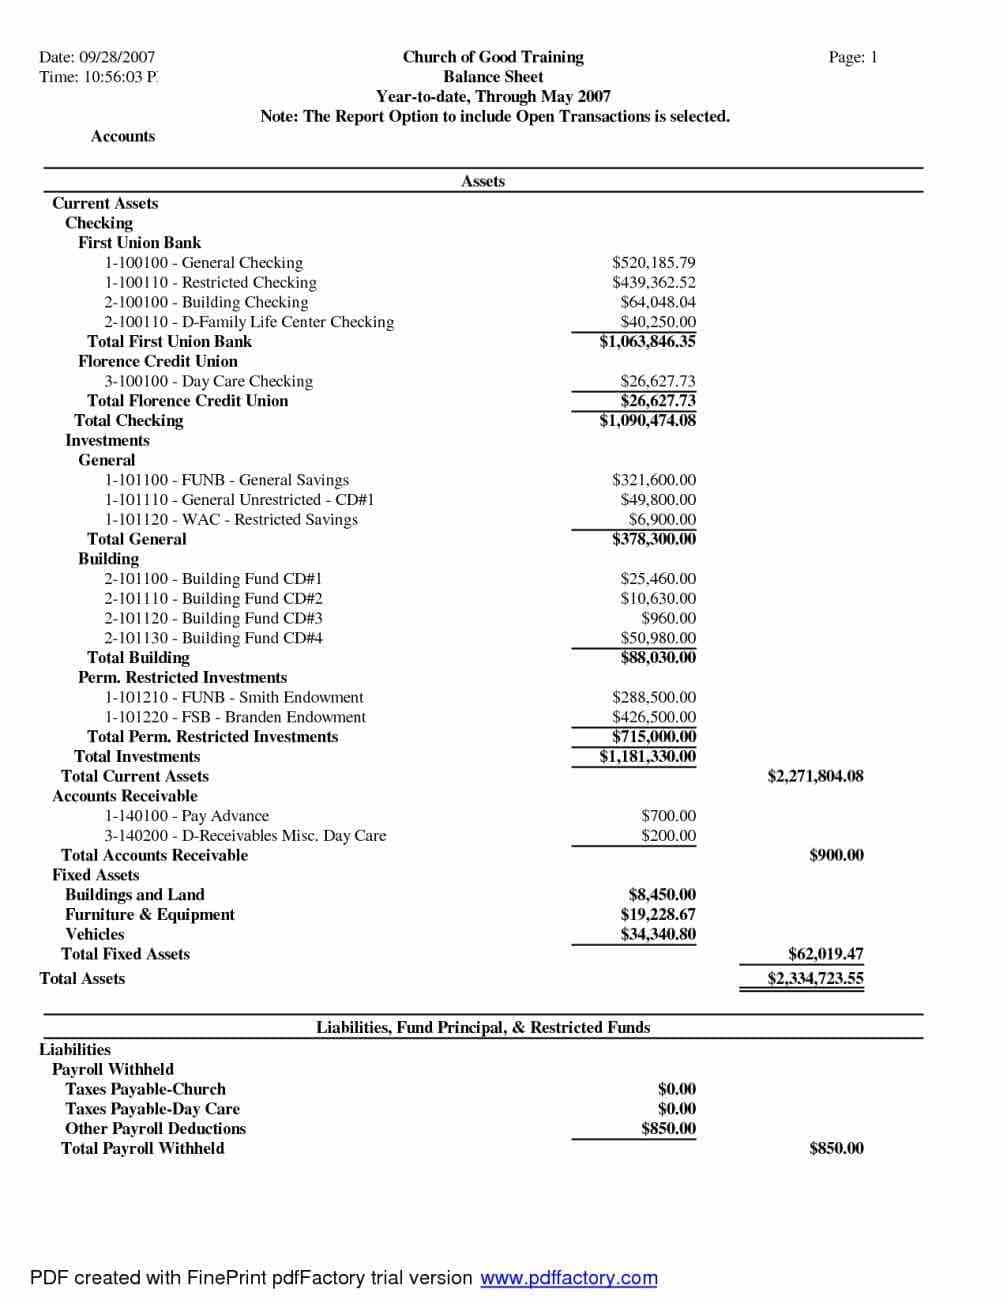 Financial Statement Template Xls And Financial Statement Analysis Template